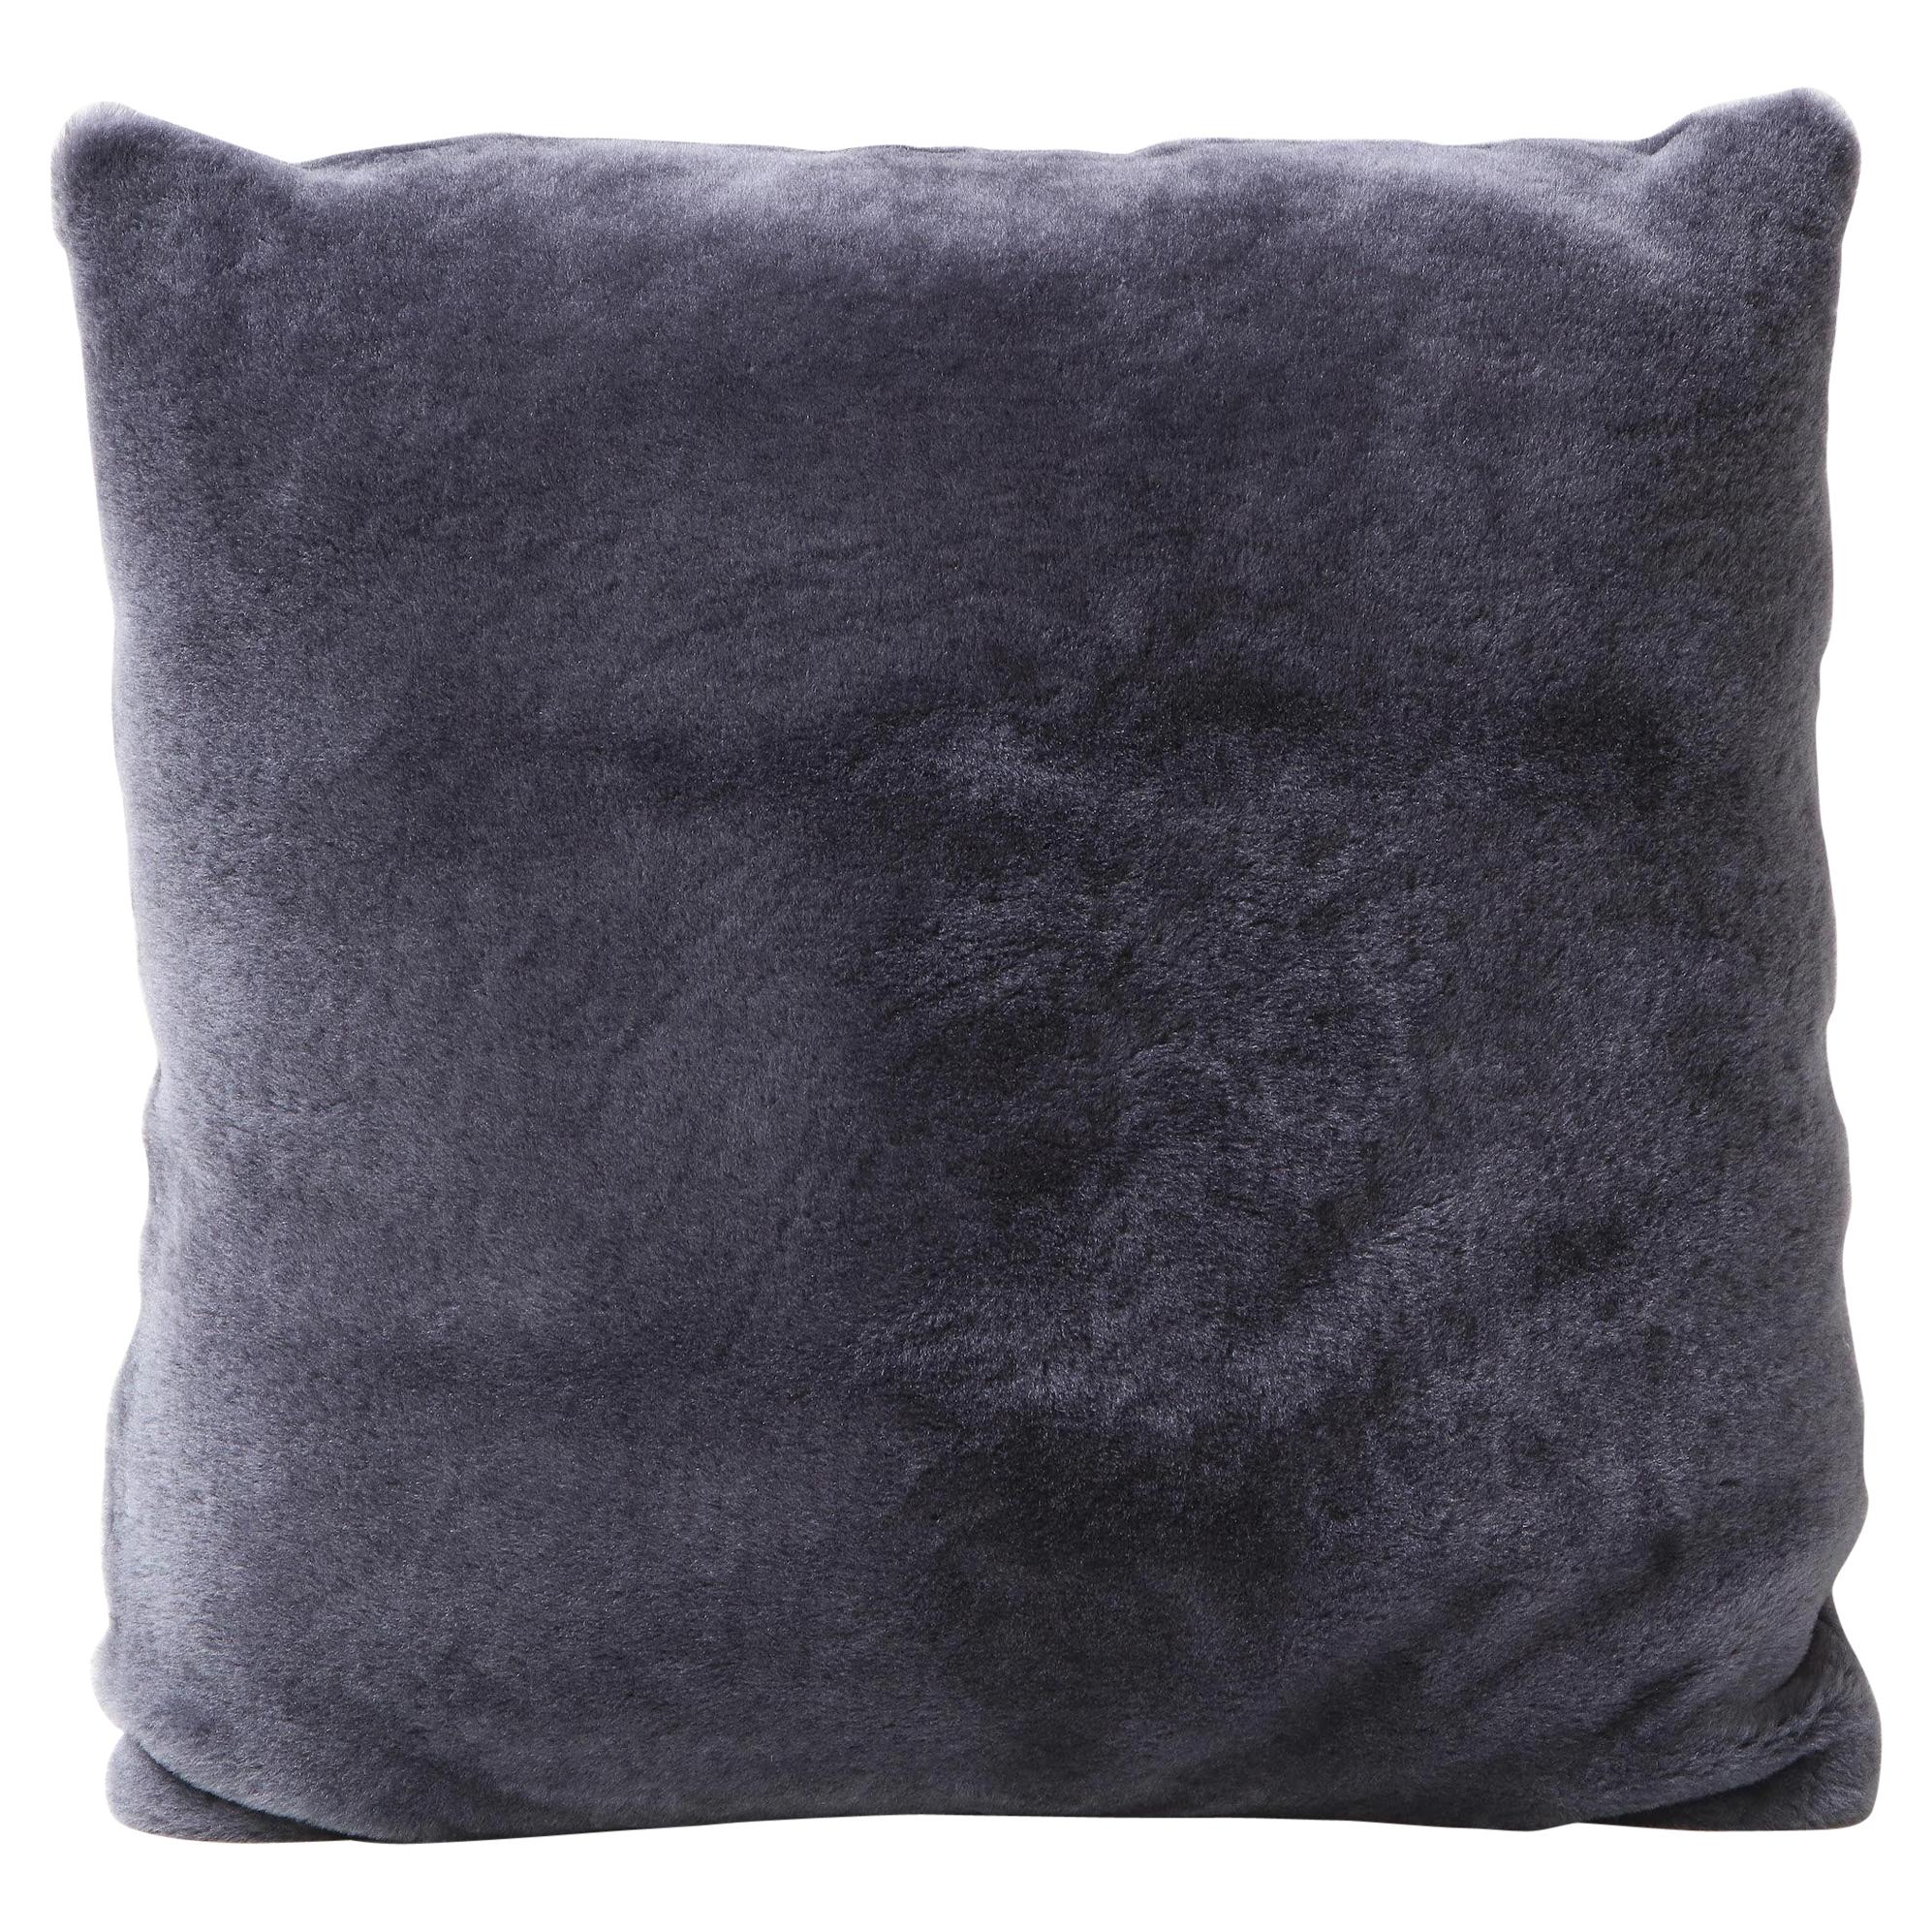 Double Sided Merino Shearling Pillow in Purple Grey Color